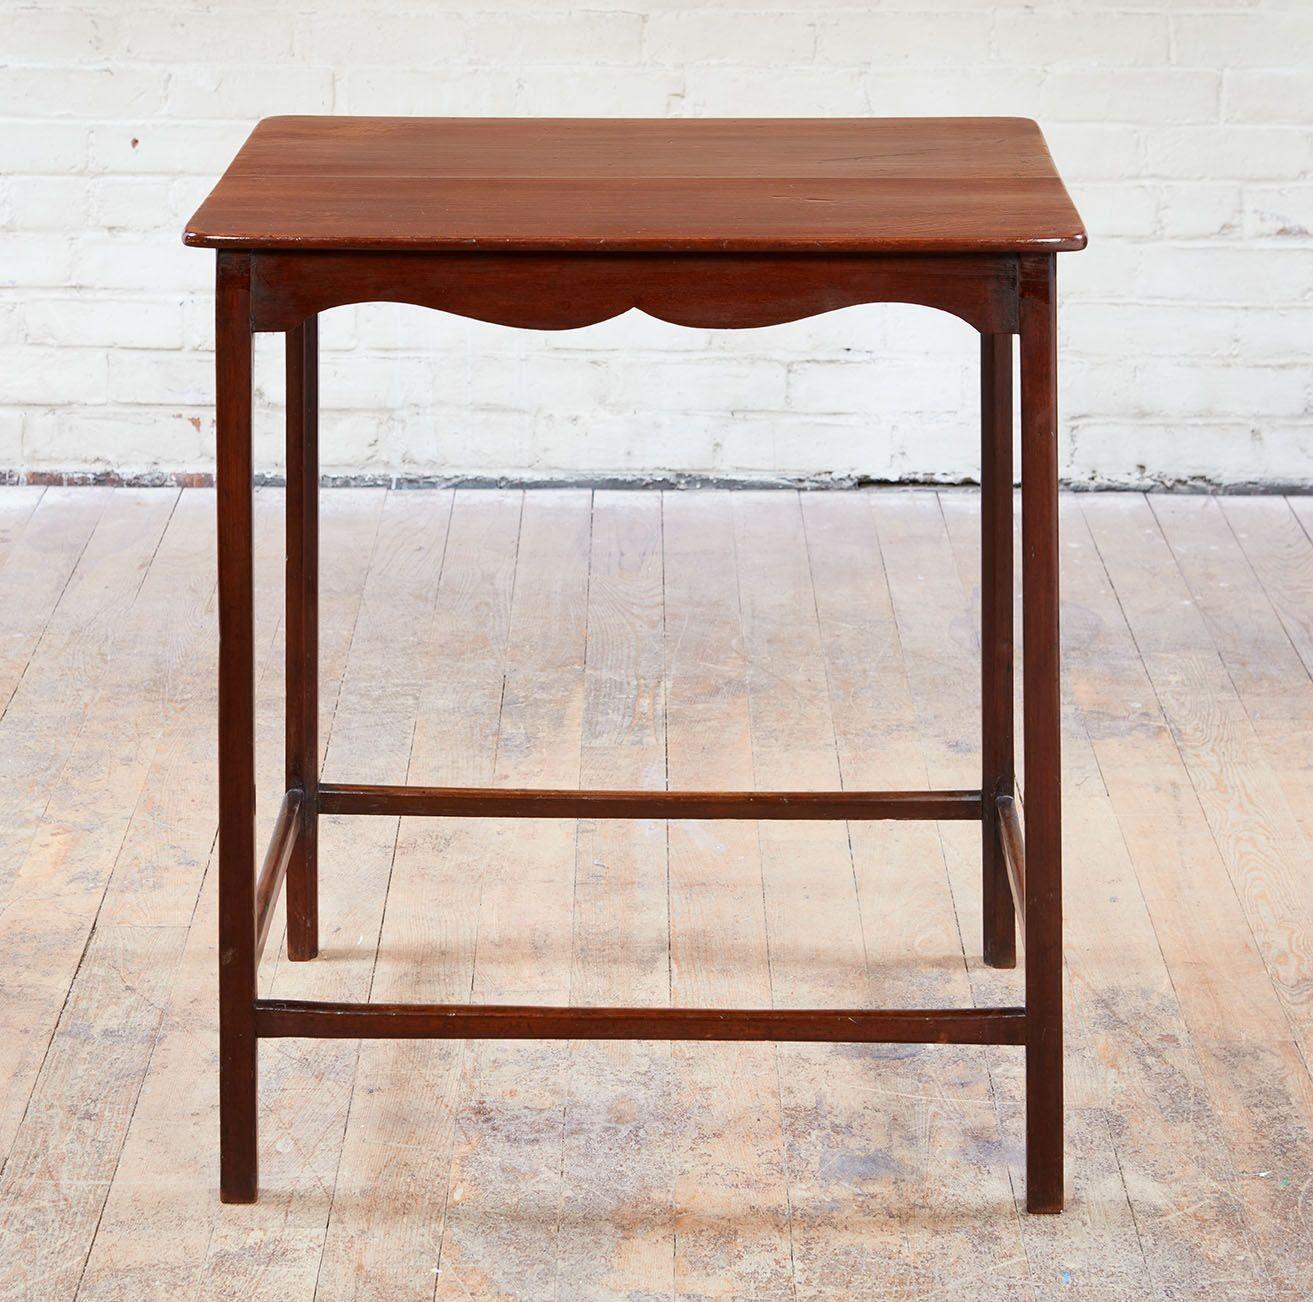 A late 18th century spider leg table, featuring a thin single piece top over a shaped apron to all sides, standing on very slender square section legs united by a continuous box stretcher. Constructed of well patinated mahogany and possessing an